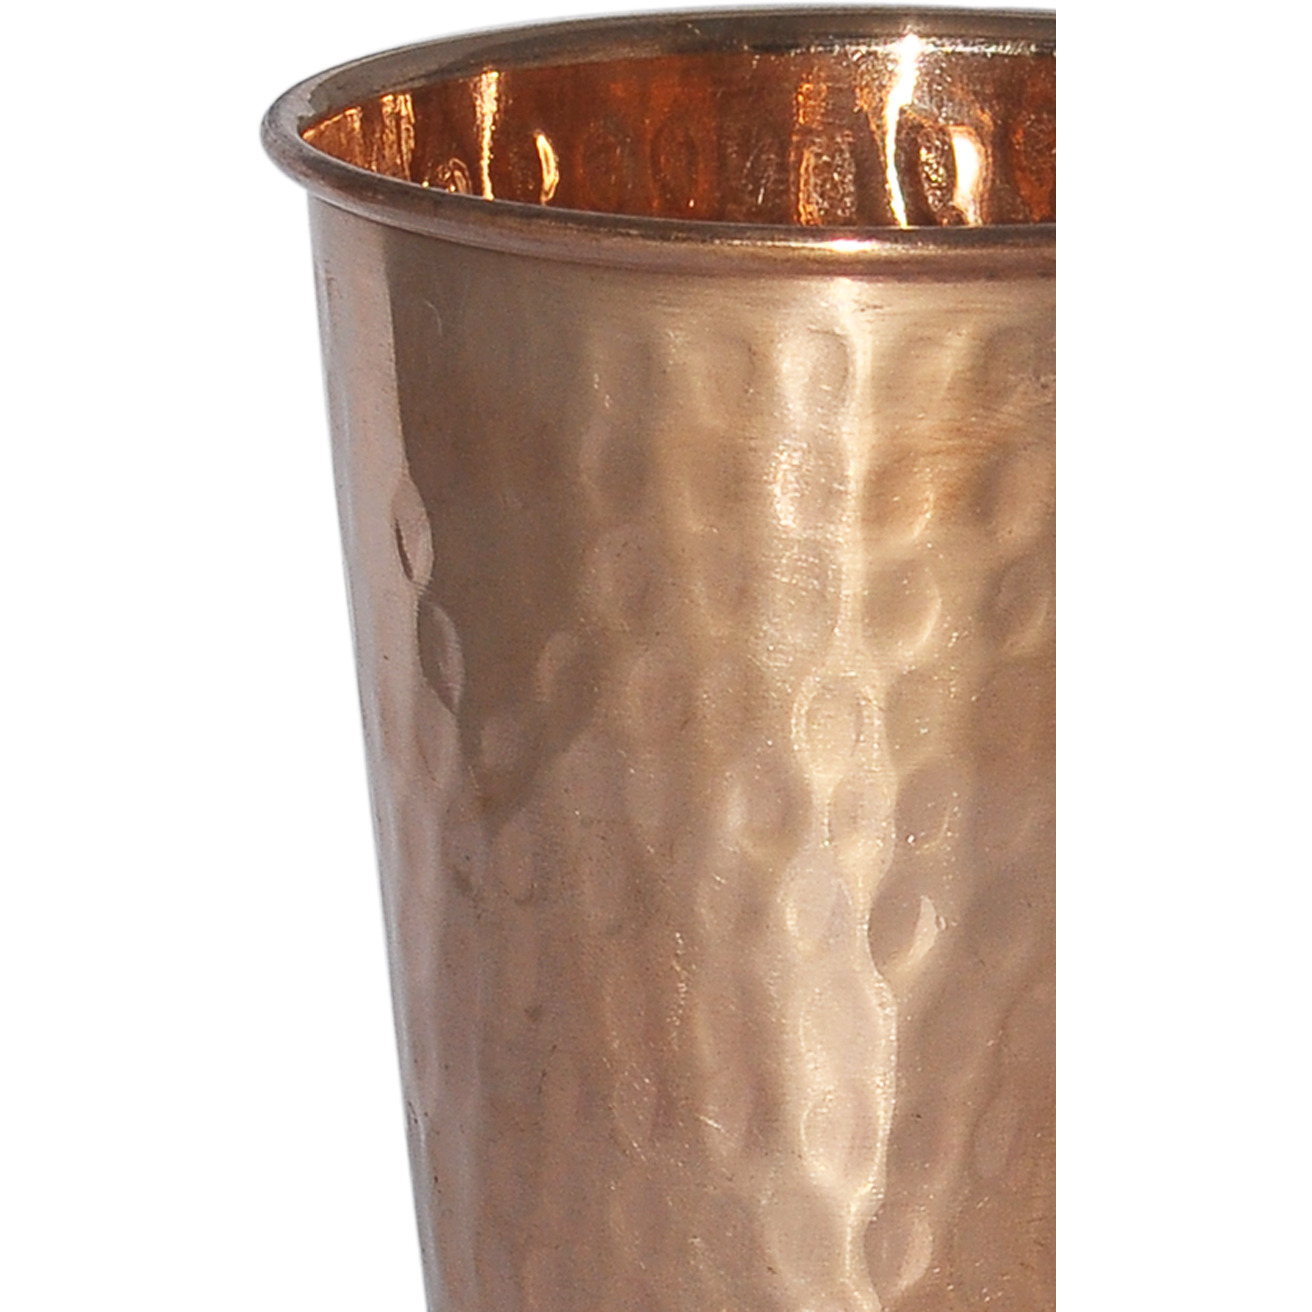 Pure Copper Handmade Water Drinking Glass Tumbler For Health Benefits Set Of 2 